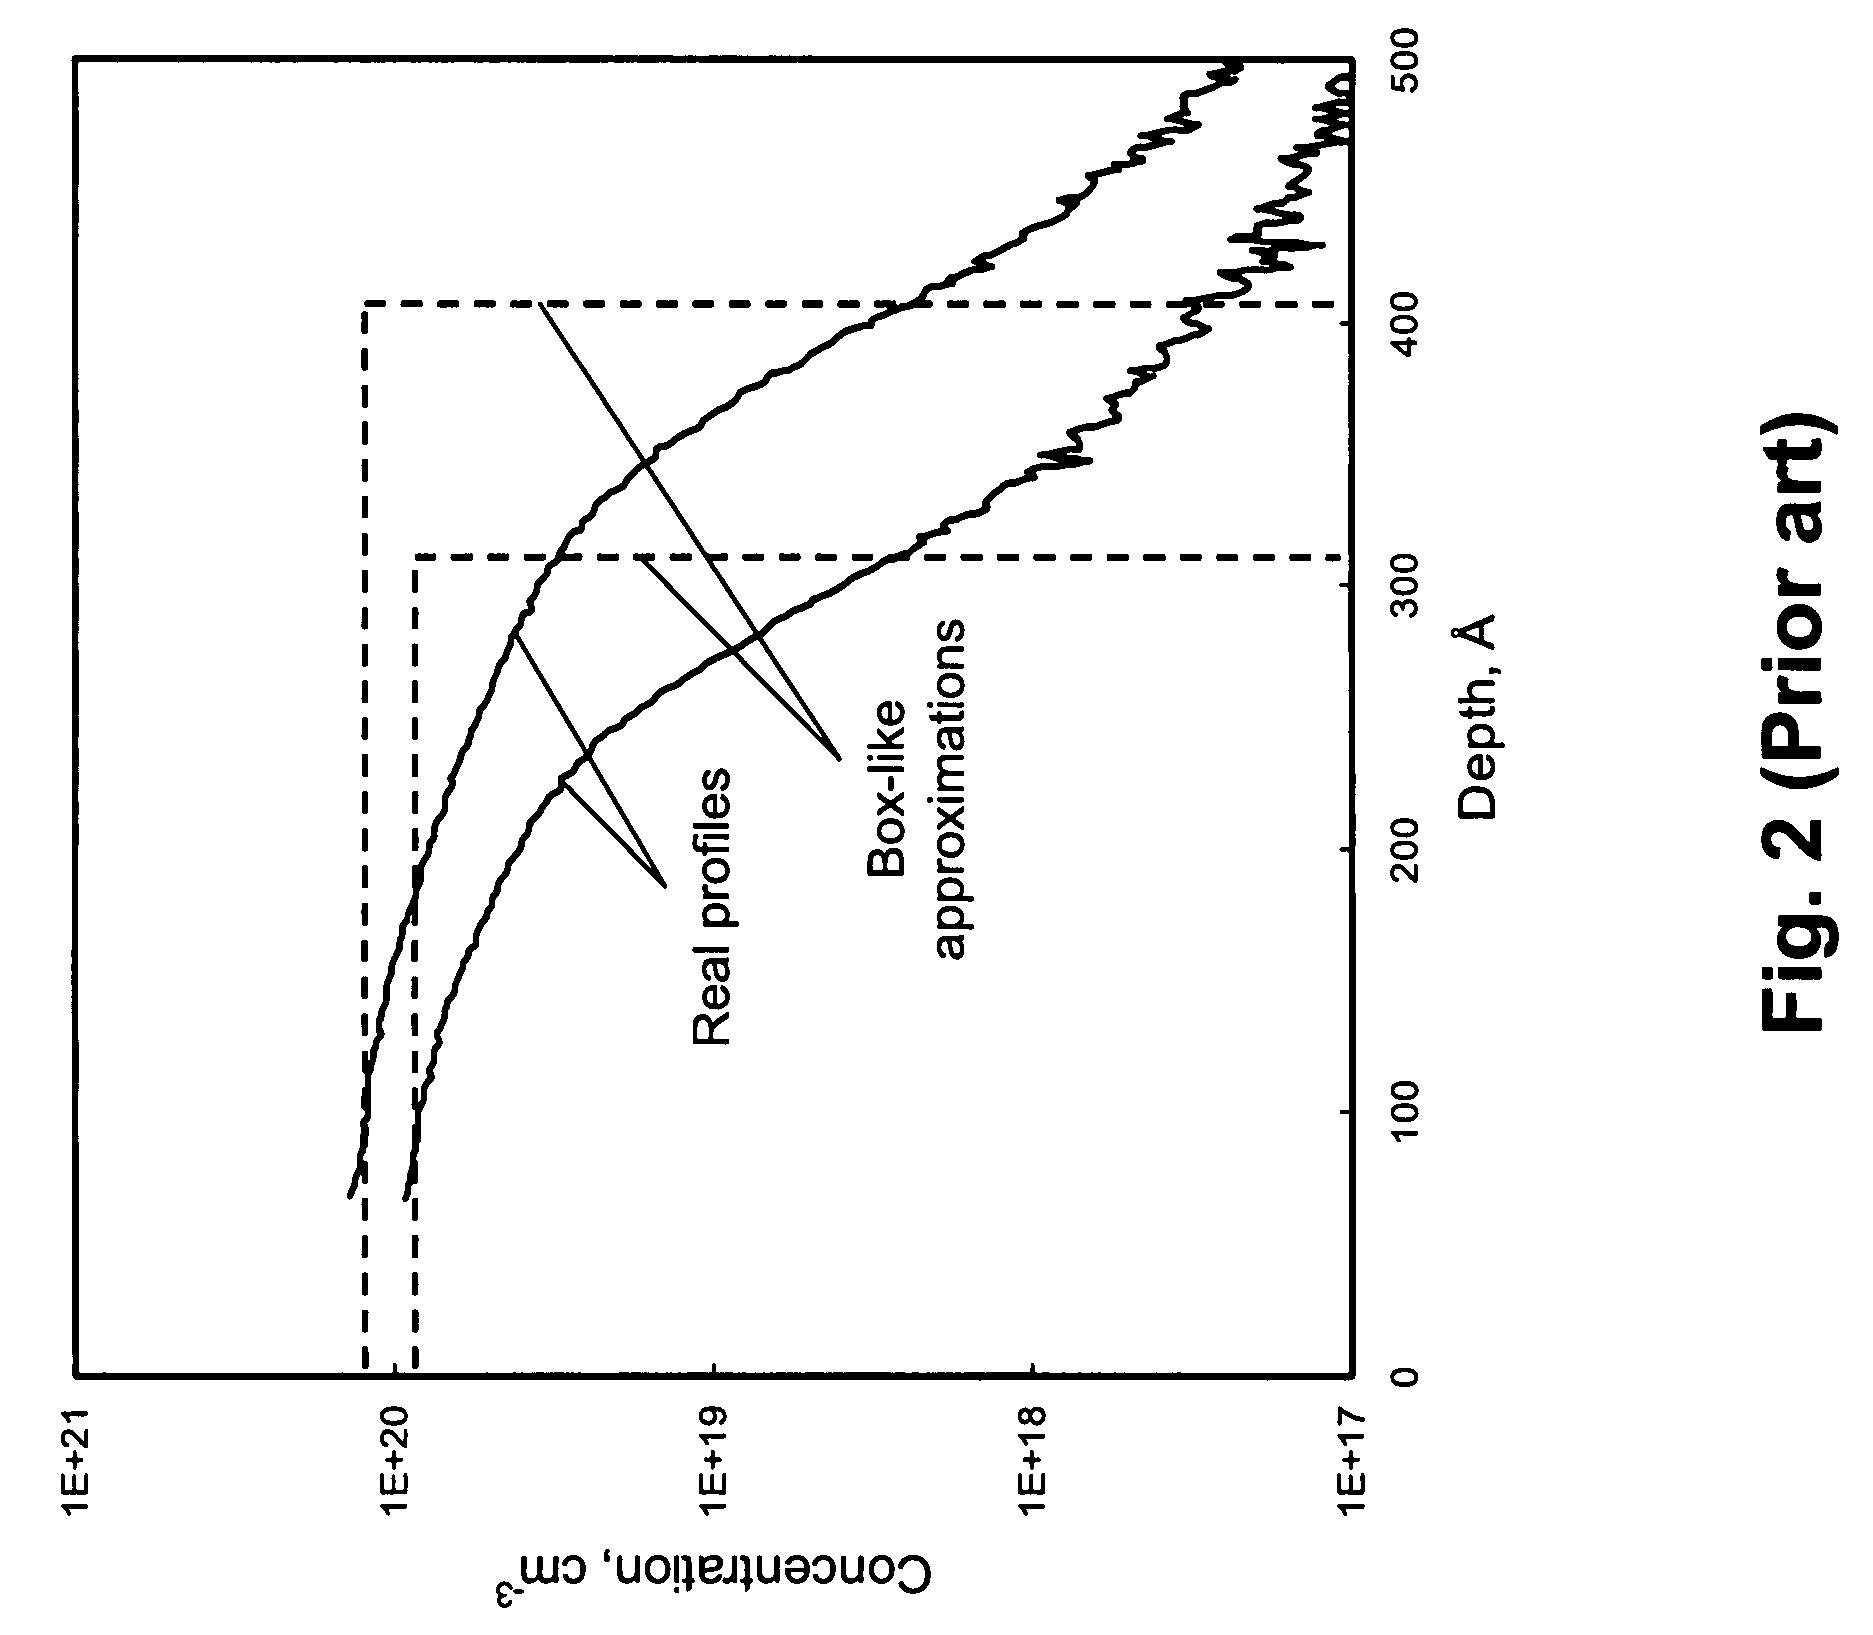 Methods for depth profiling in semiconductors using modulated optical reflectance technology